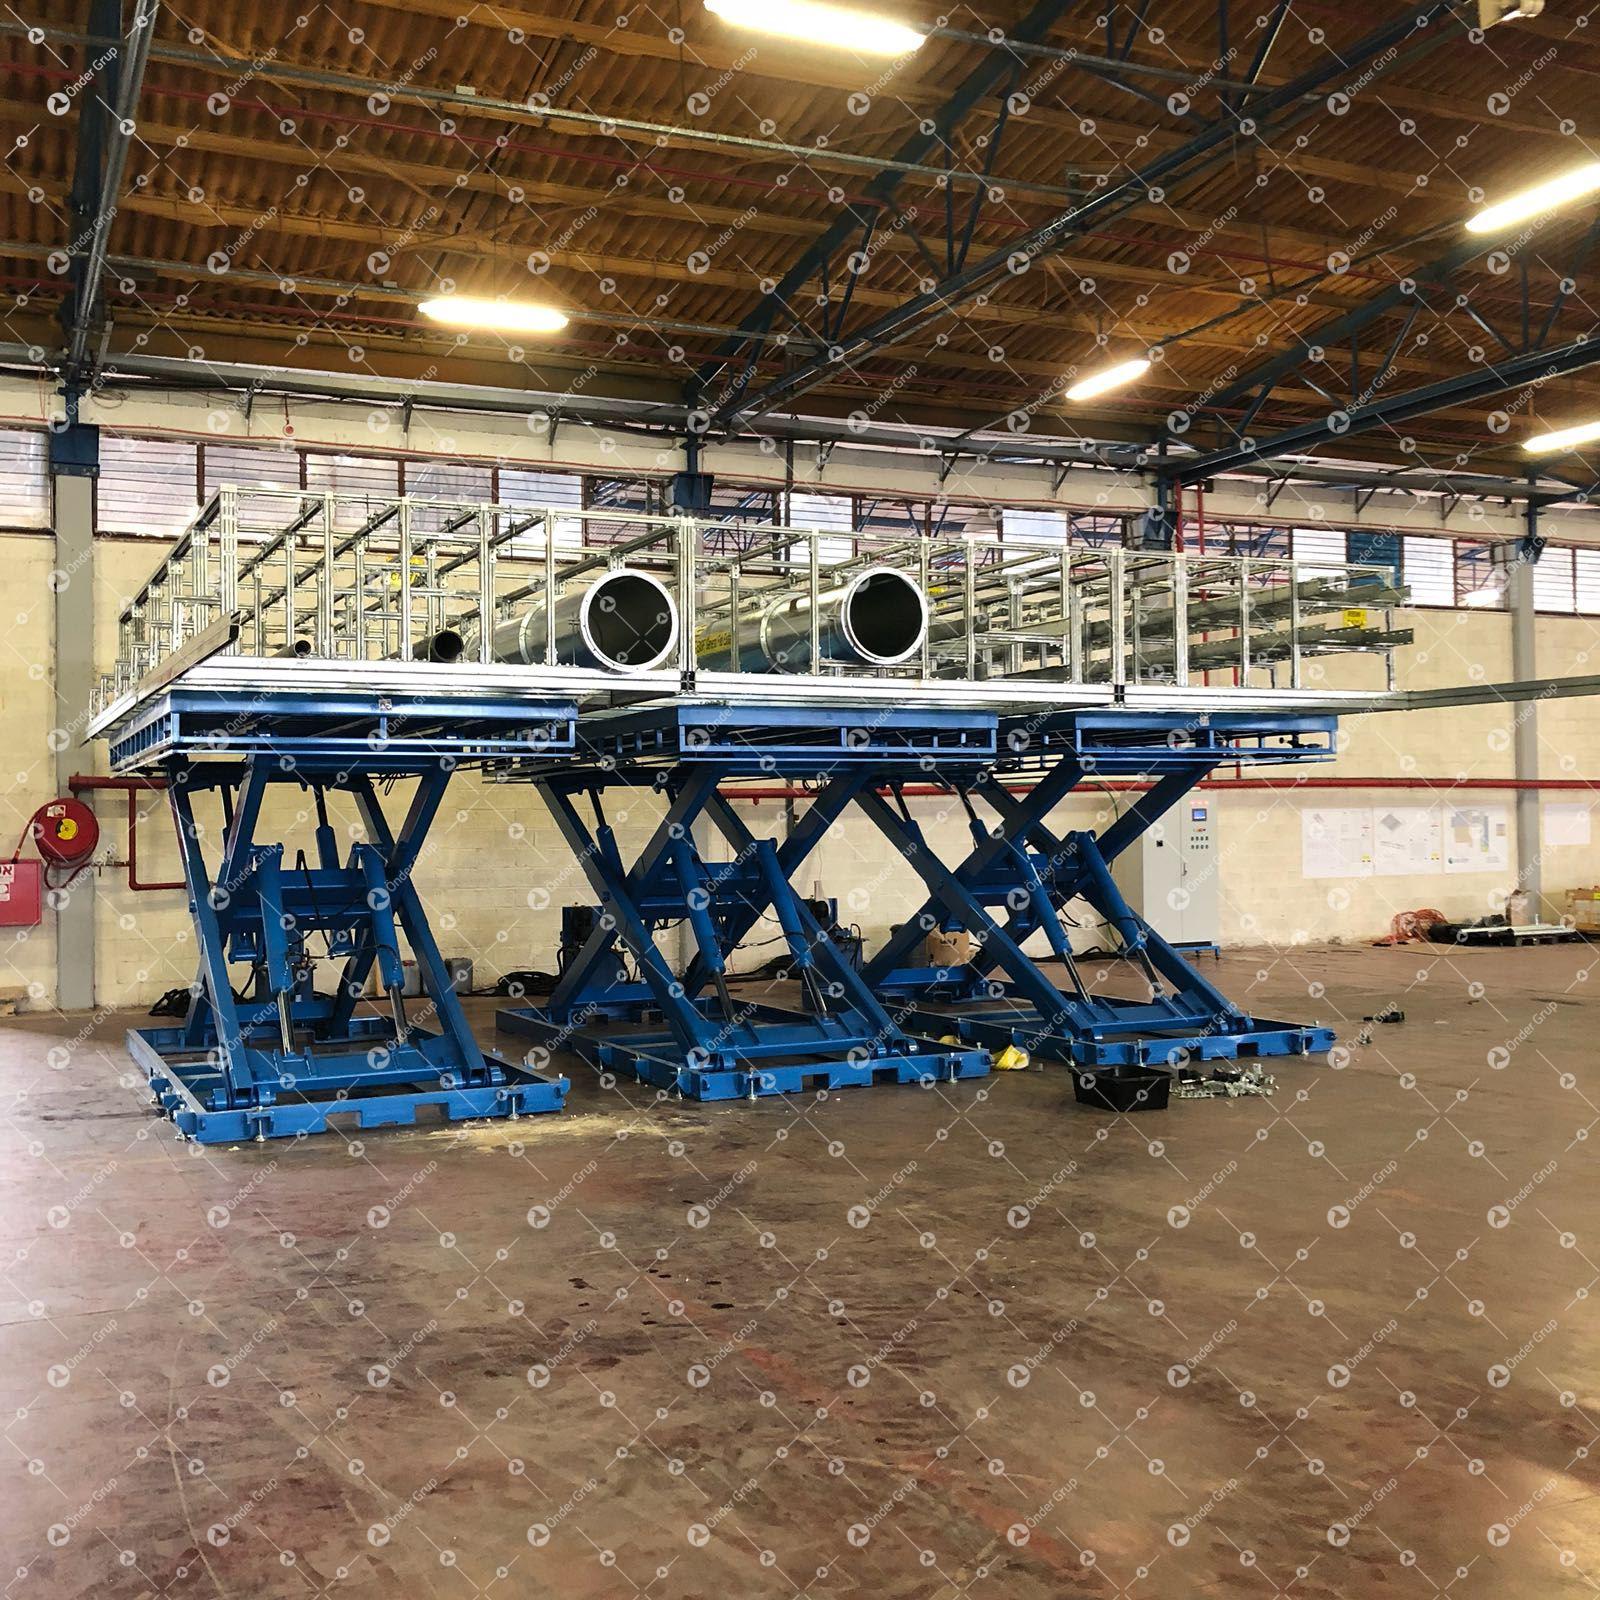 8 Unit Lifting Tables working with simultaneously lifting system.